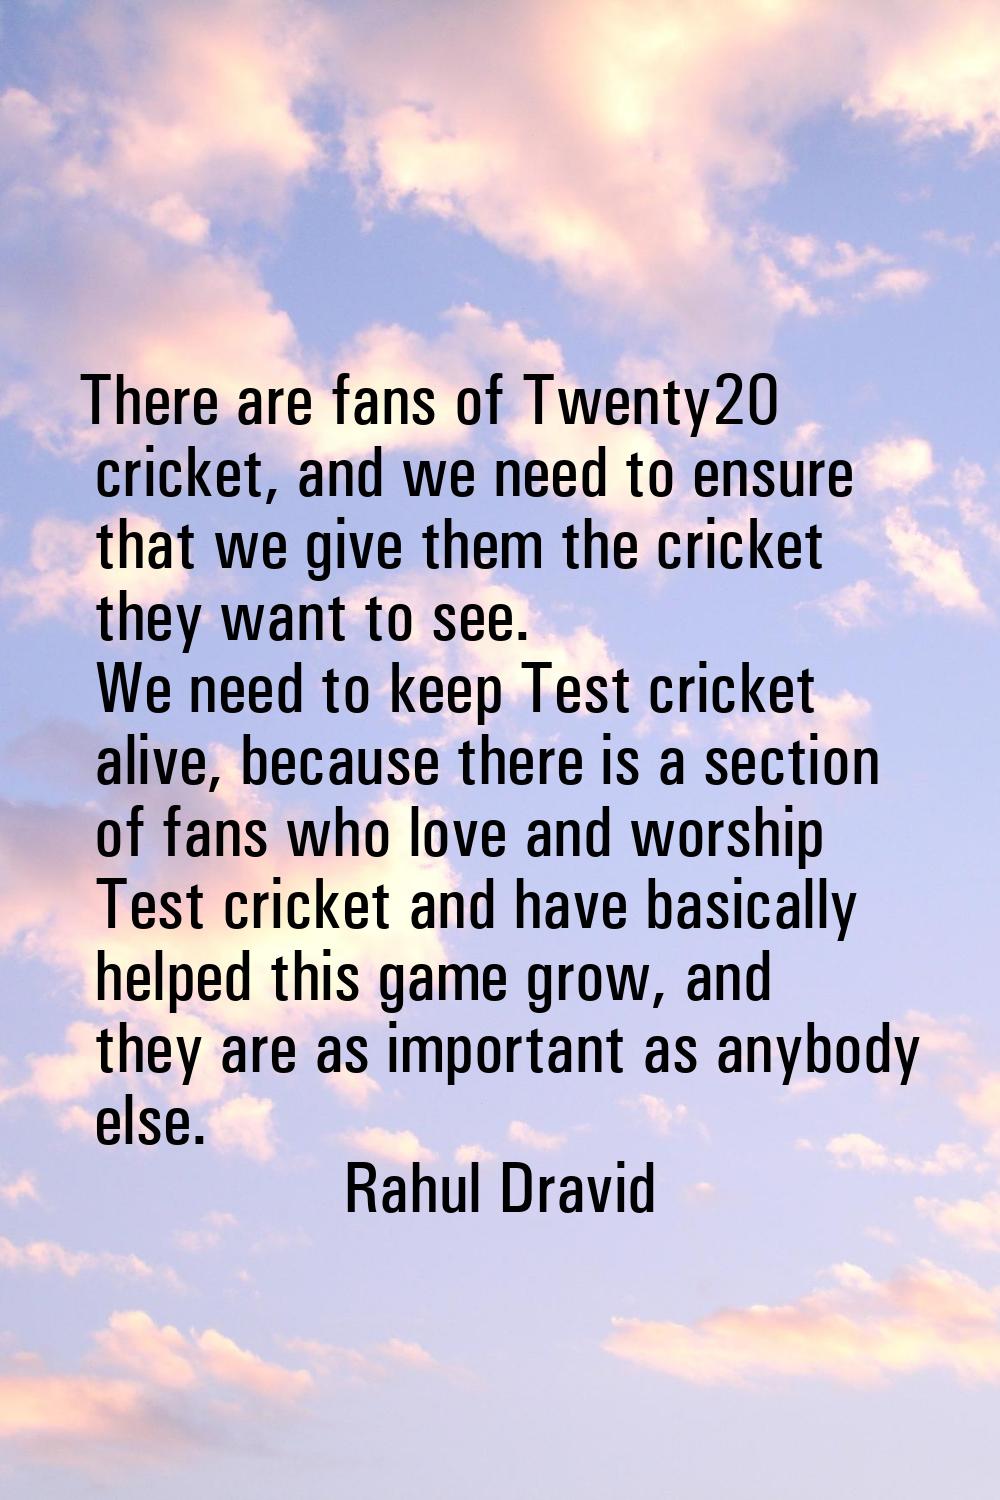 There are fans of Twenty20 cricket, and we need to ensure that we give them the cricket they want t